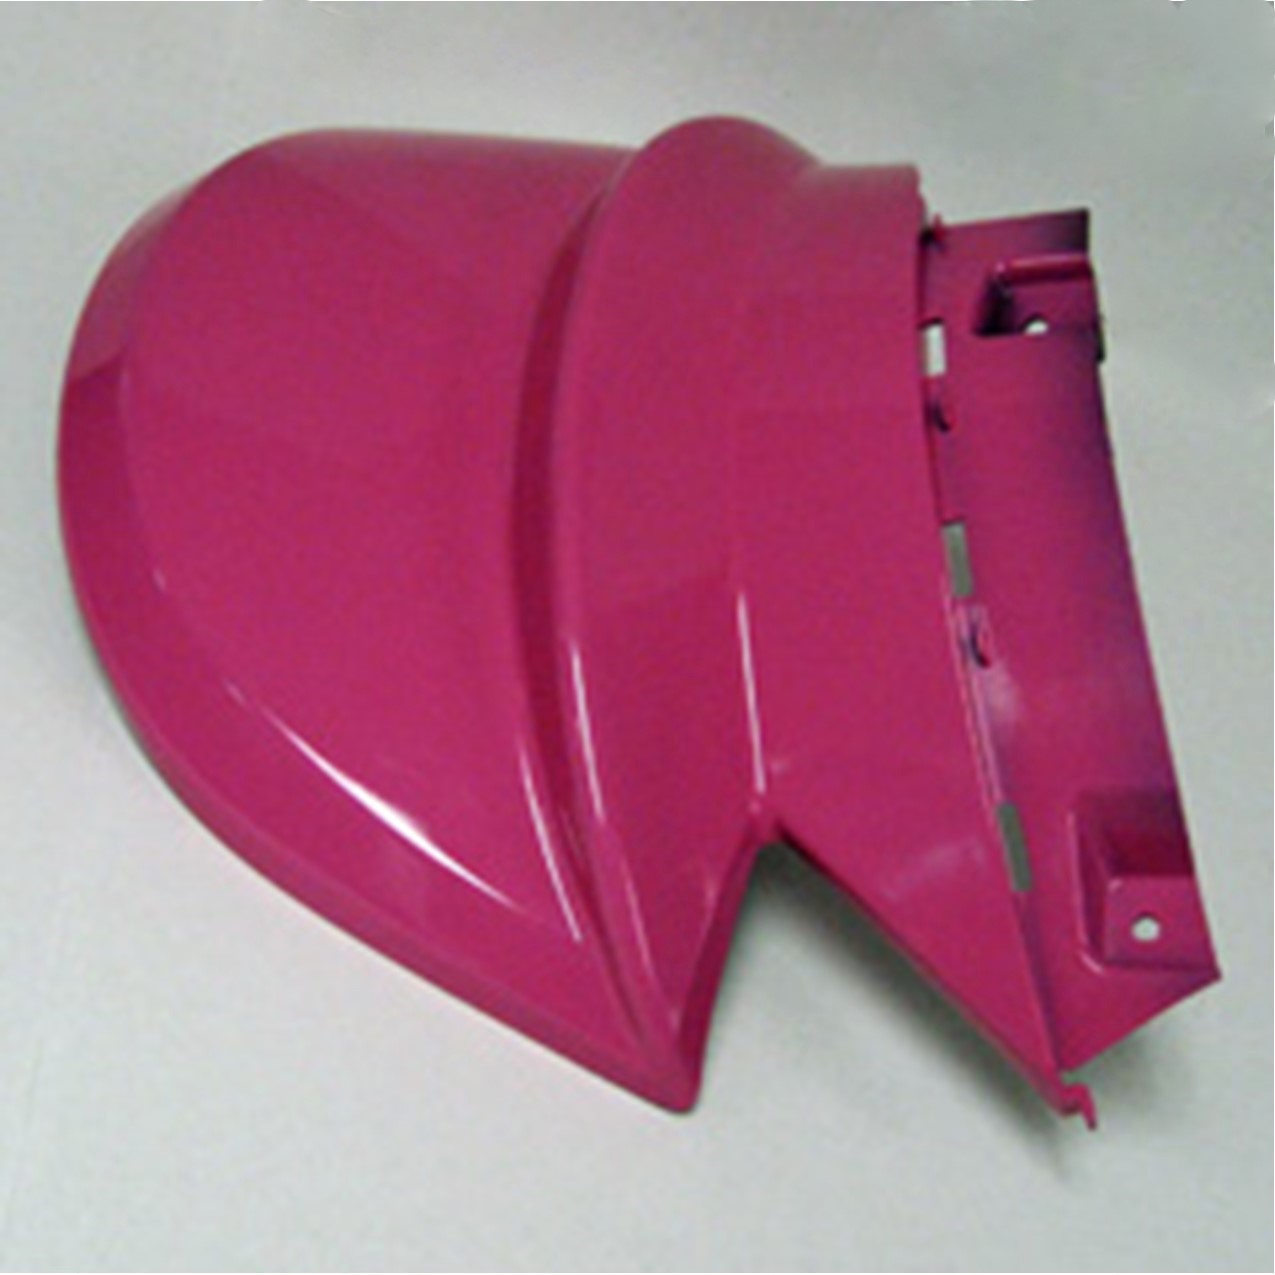 Right Front Fender Panel (Pink Painted) Fits E-Ton Viper RXL 50, 70, 90cc ATVs